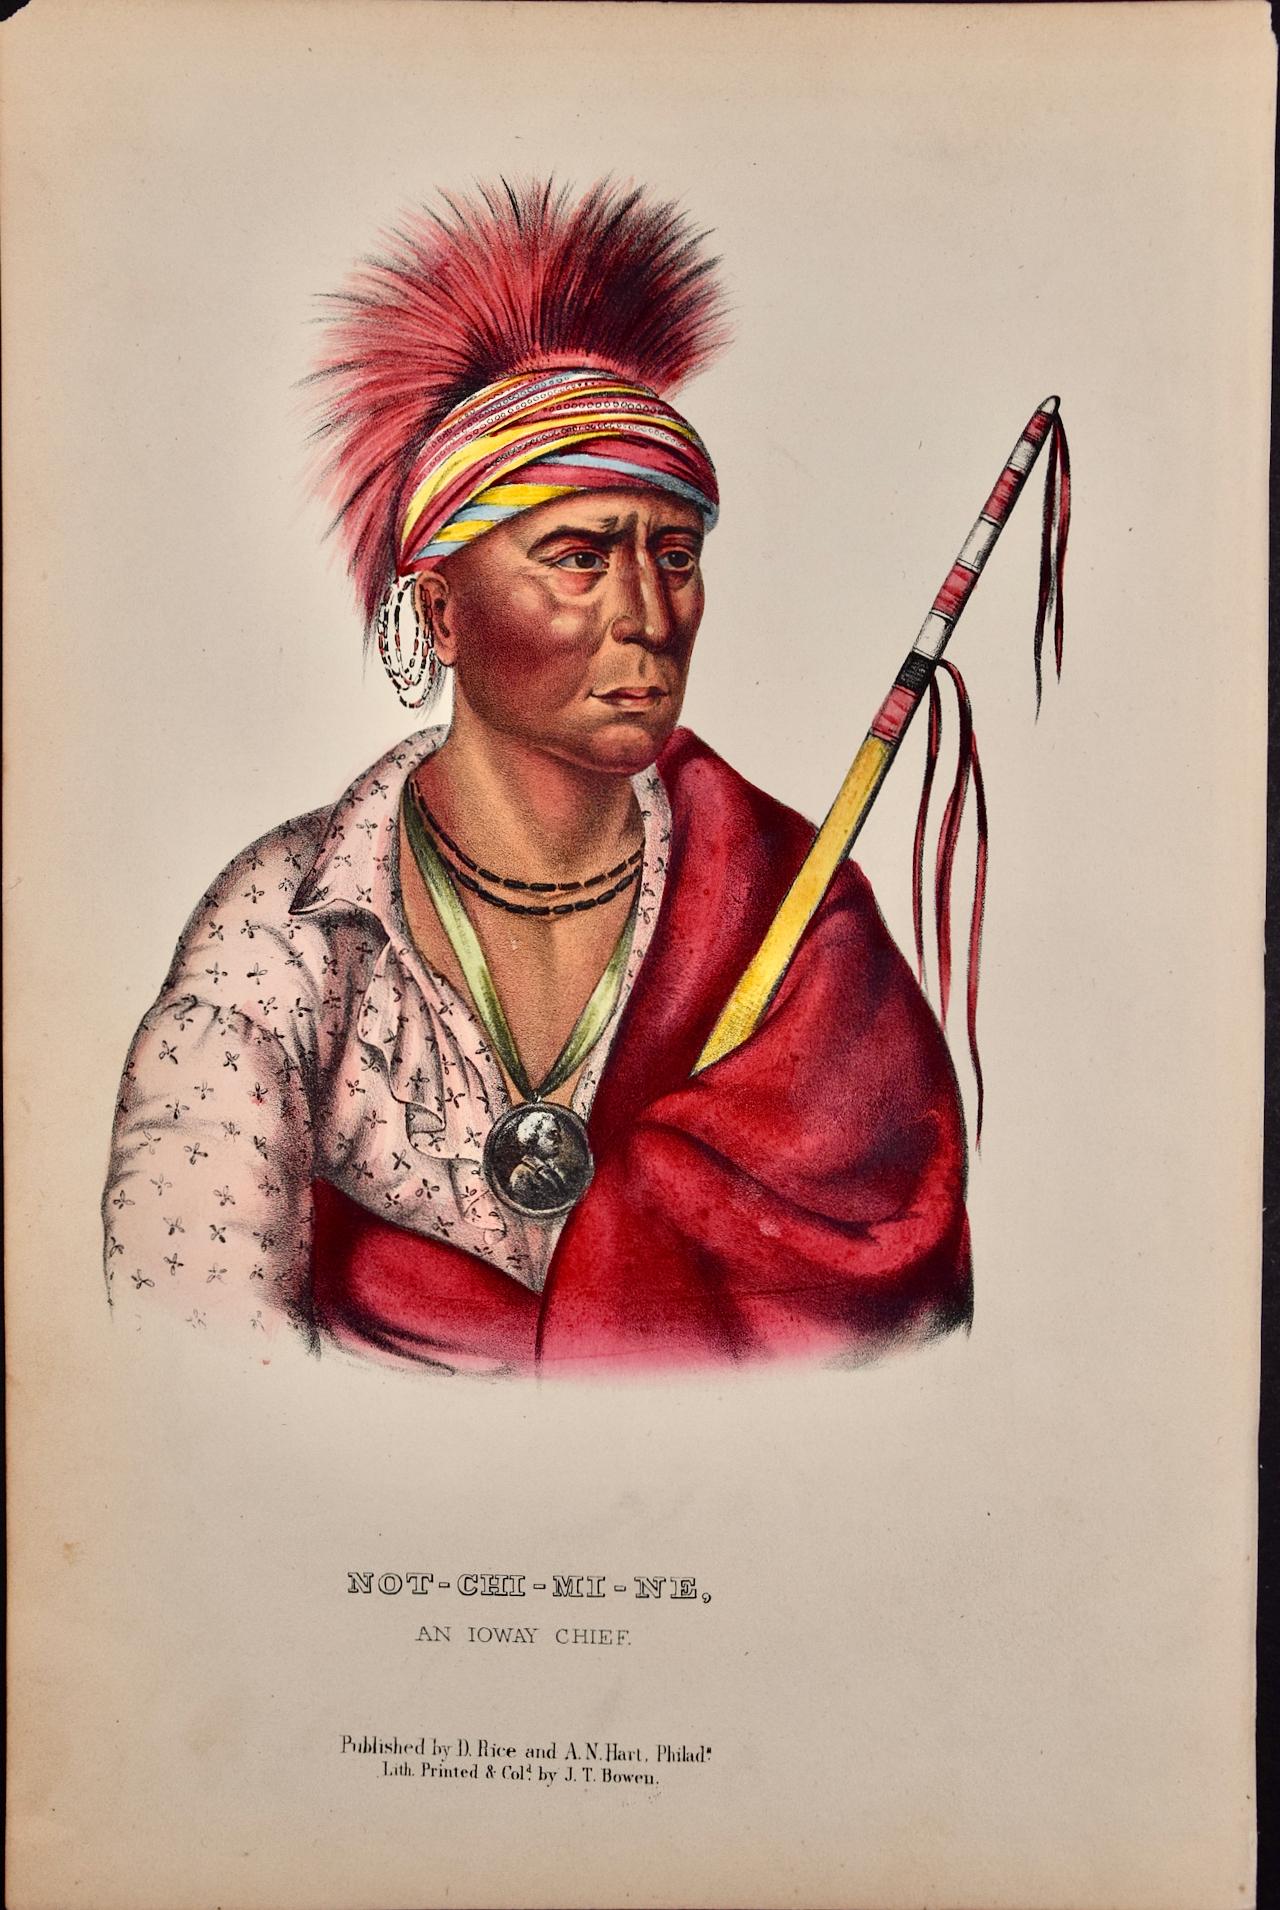 This is an original 19th century hand-colored McKenney and Hall lithograph of a Native American entitled "Not-Chi-Mi-Ne, An Ioway Chief ", lithographed by J. T. Bowen after a painting by Charles Bird King and published by Rice and Hart & Co. in